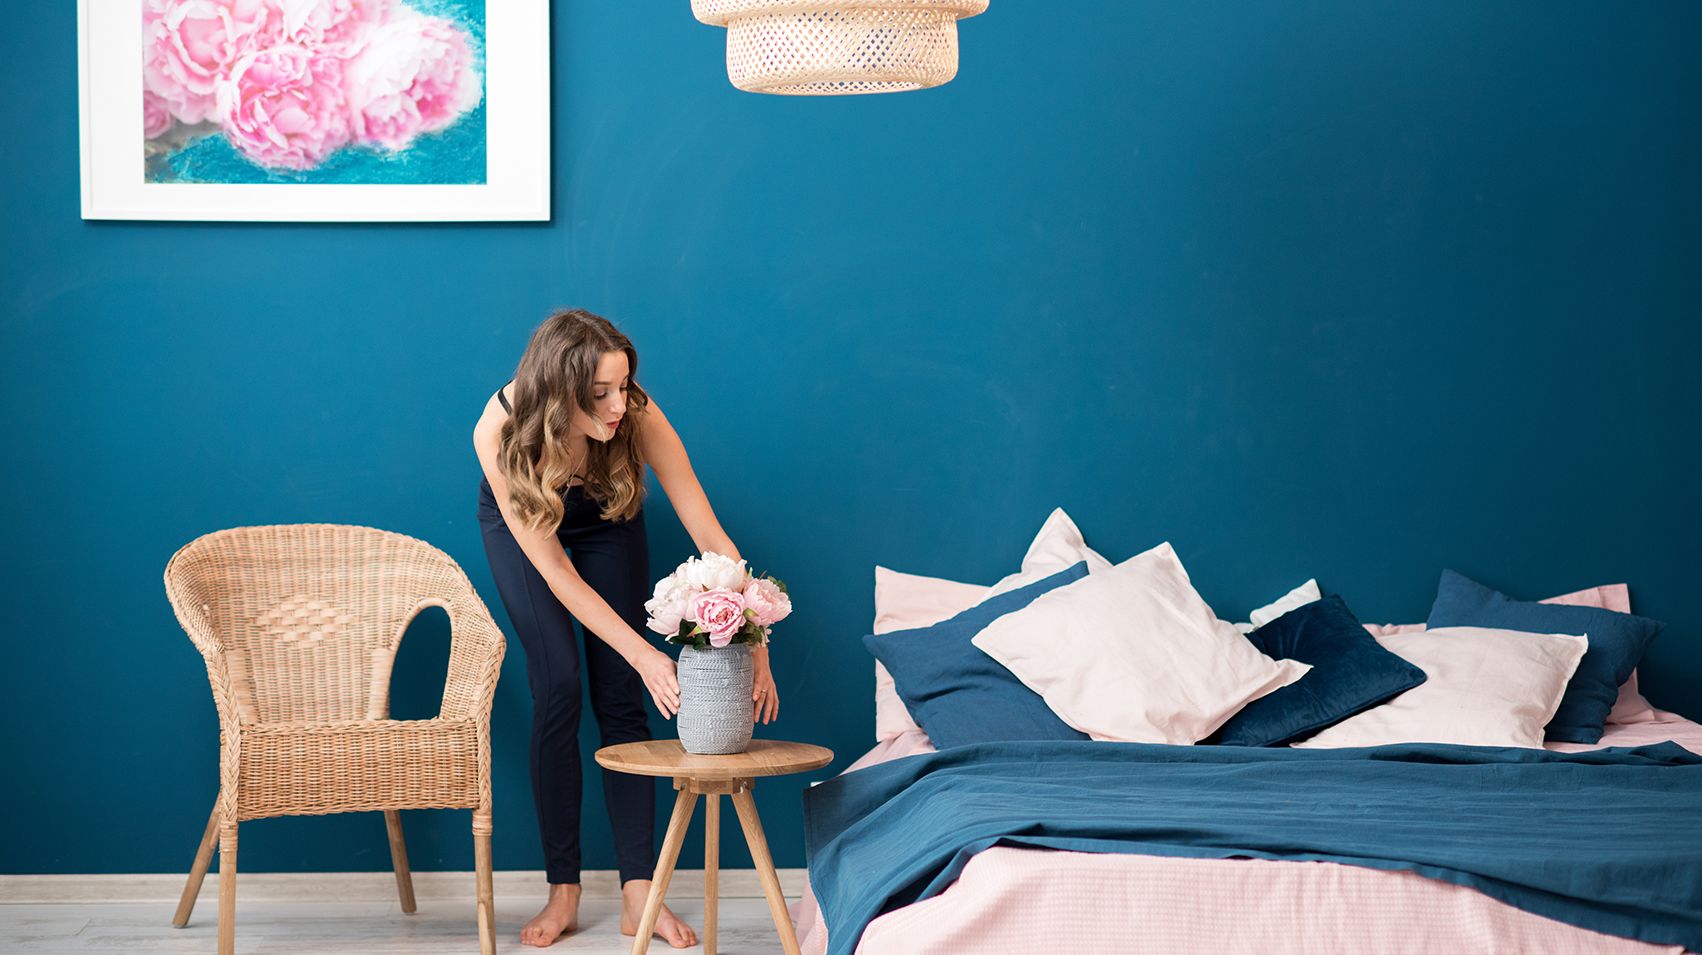 The official 2023 checklist for spring cleaning your bedroom | CNN Underscored